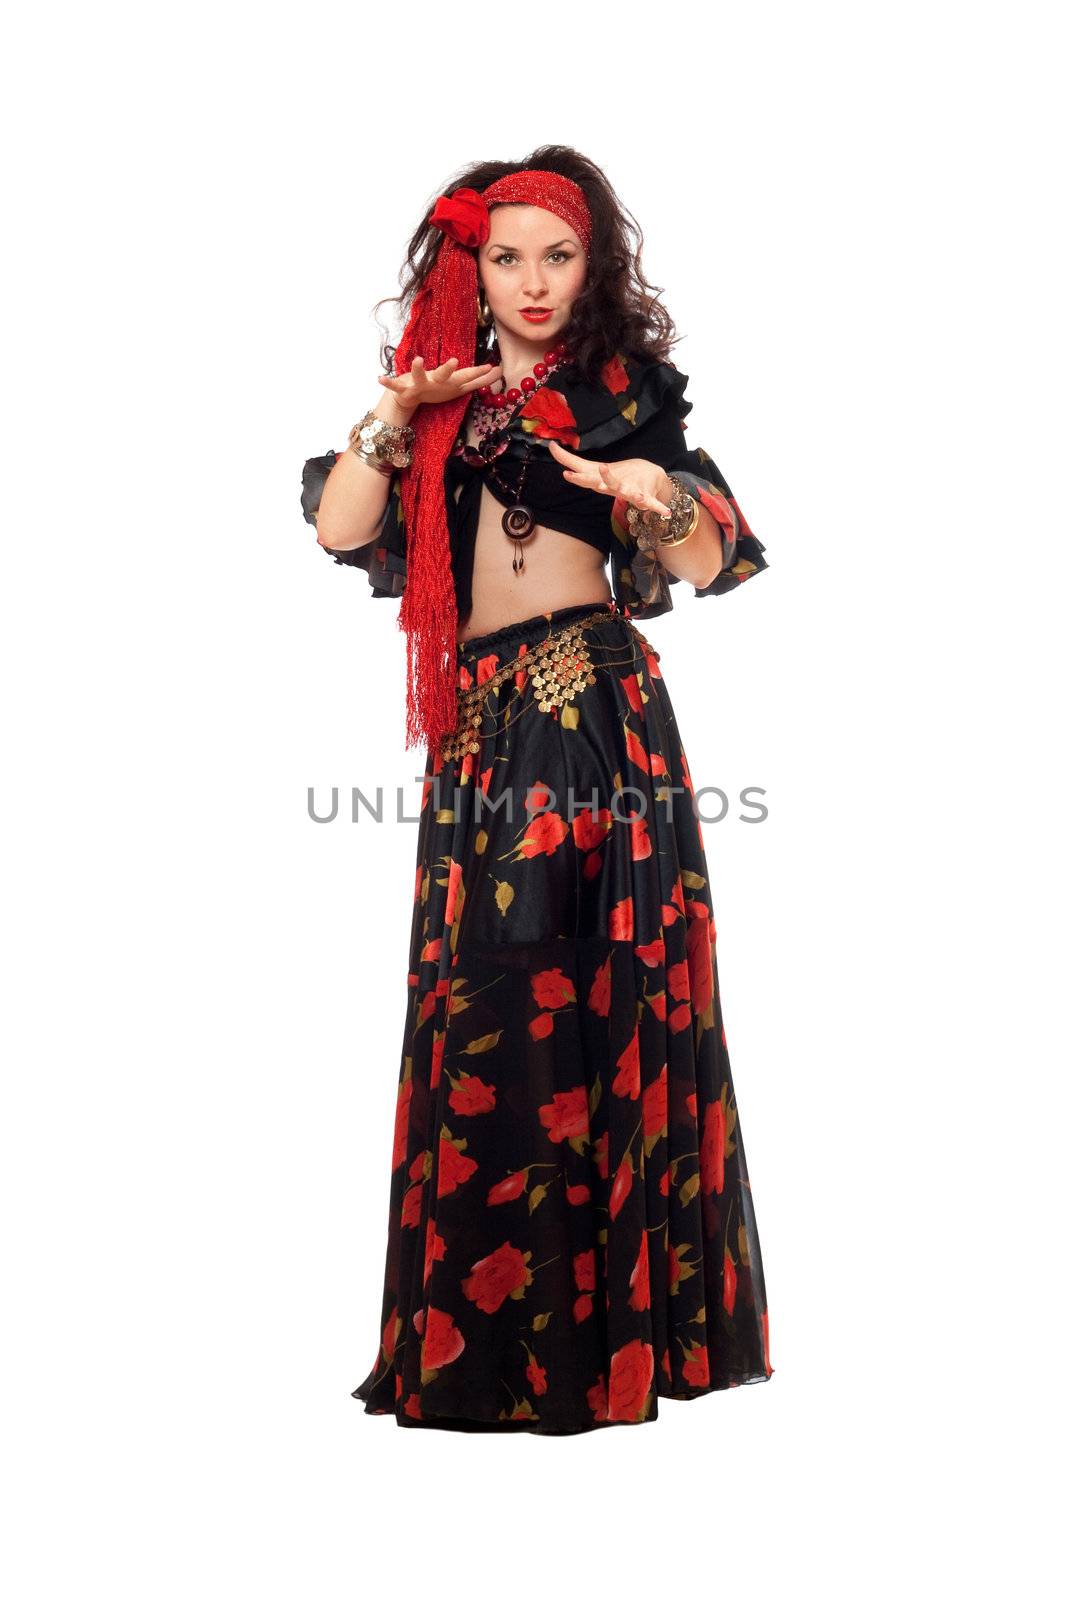 Sensual gypsy woman in a black skirt. Isolated on white